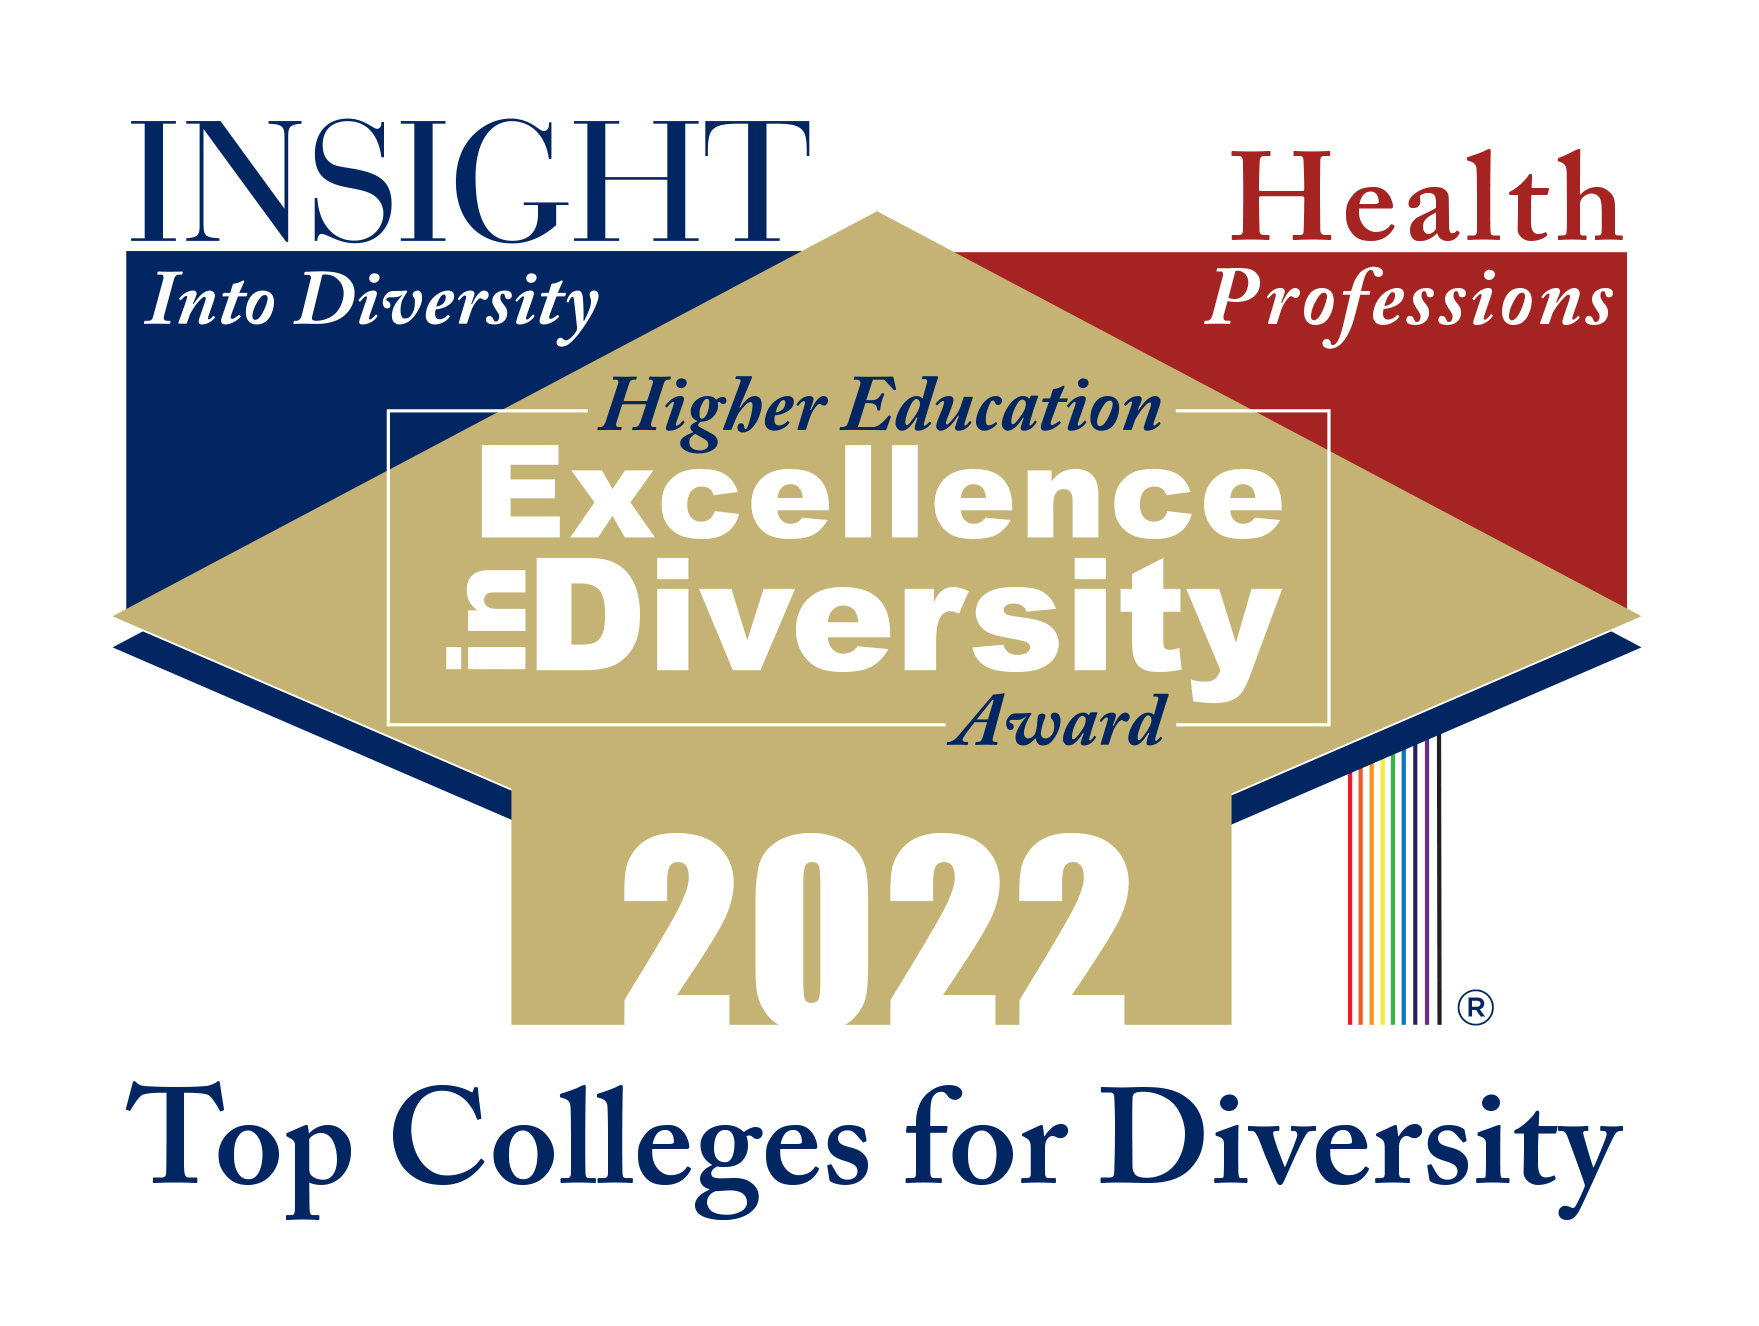 Higher Education Excellence in Diversity Award 20212 width=